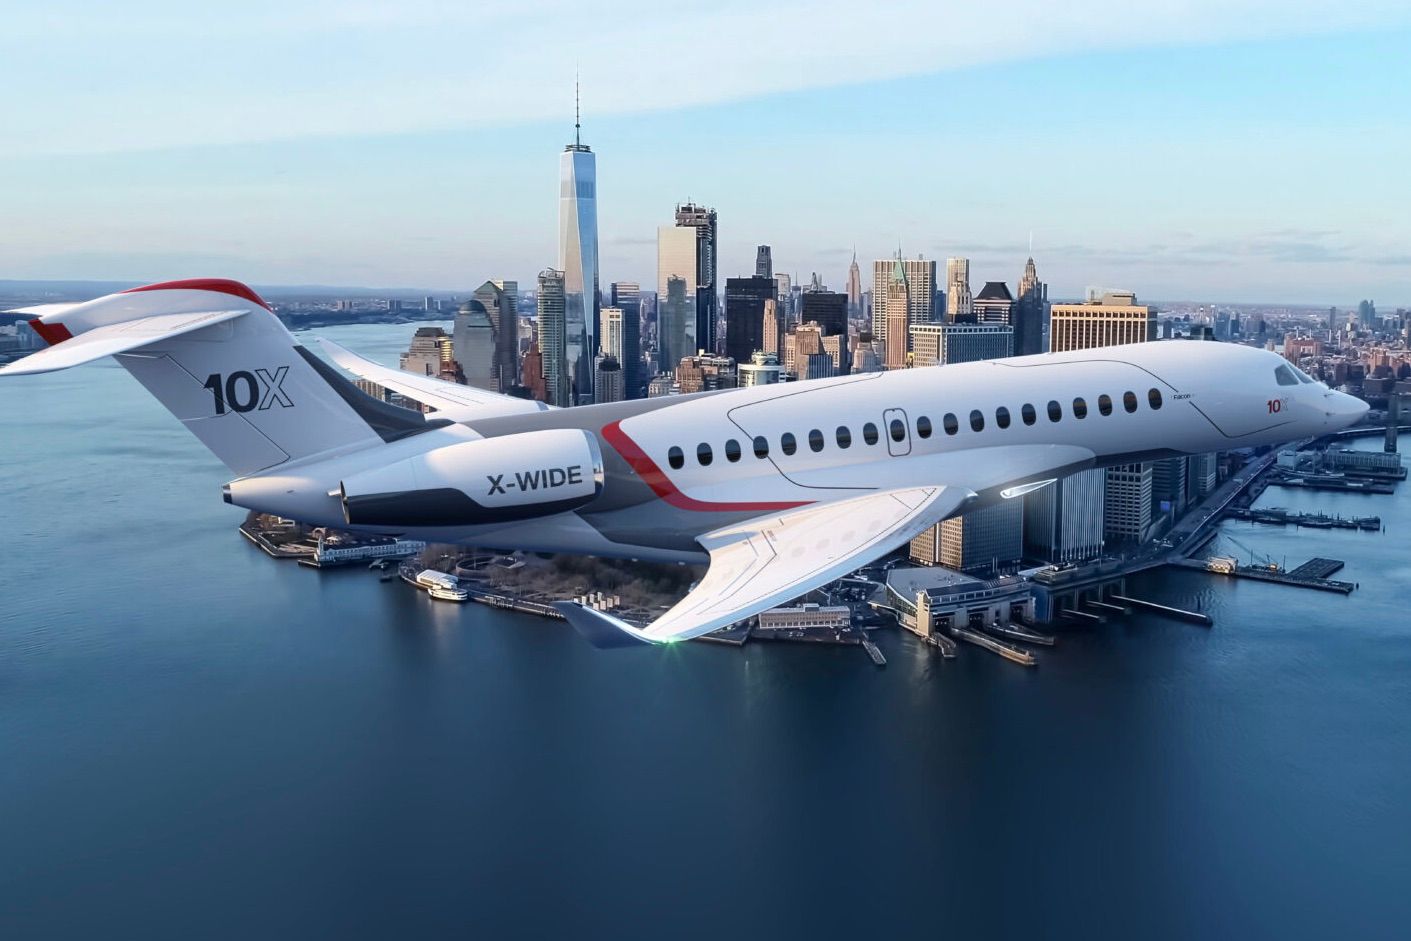 A Dassault Falcon10X flying over New York City.